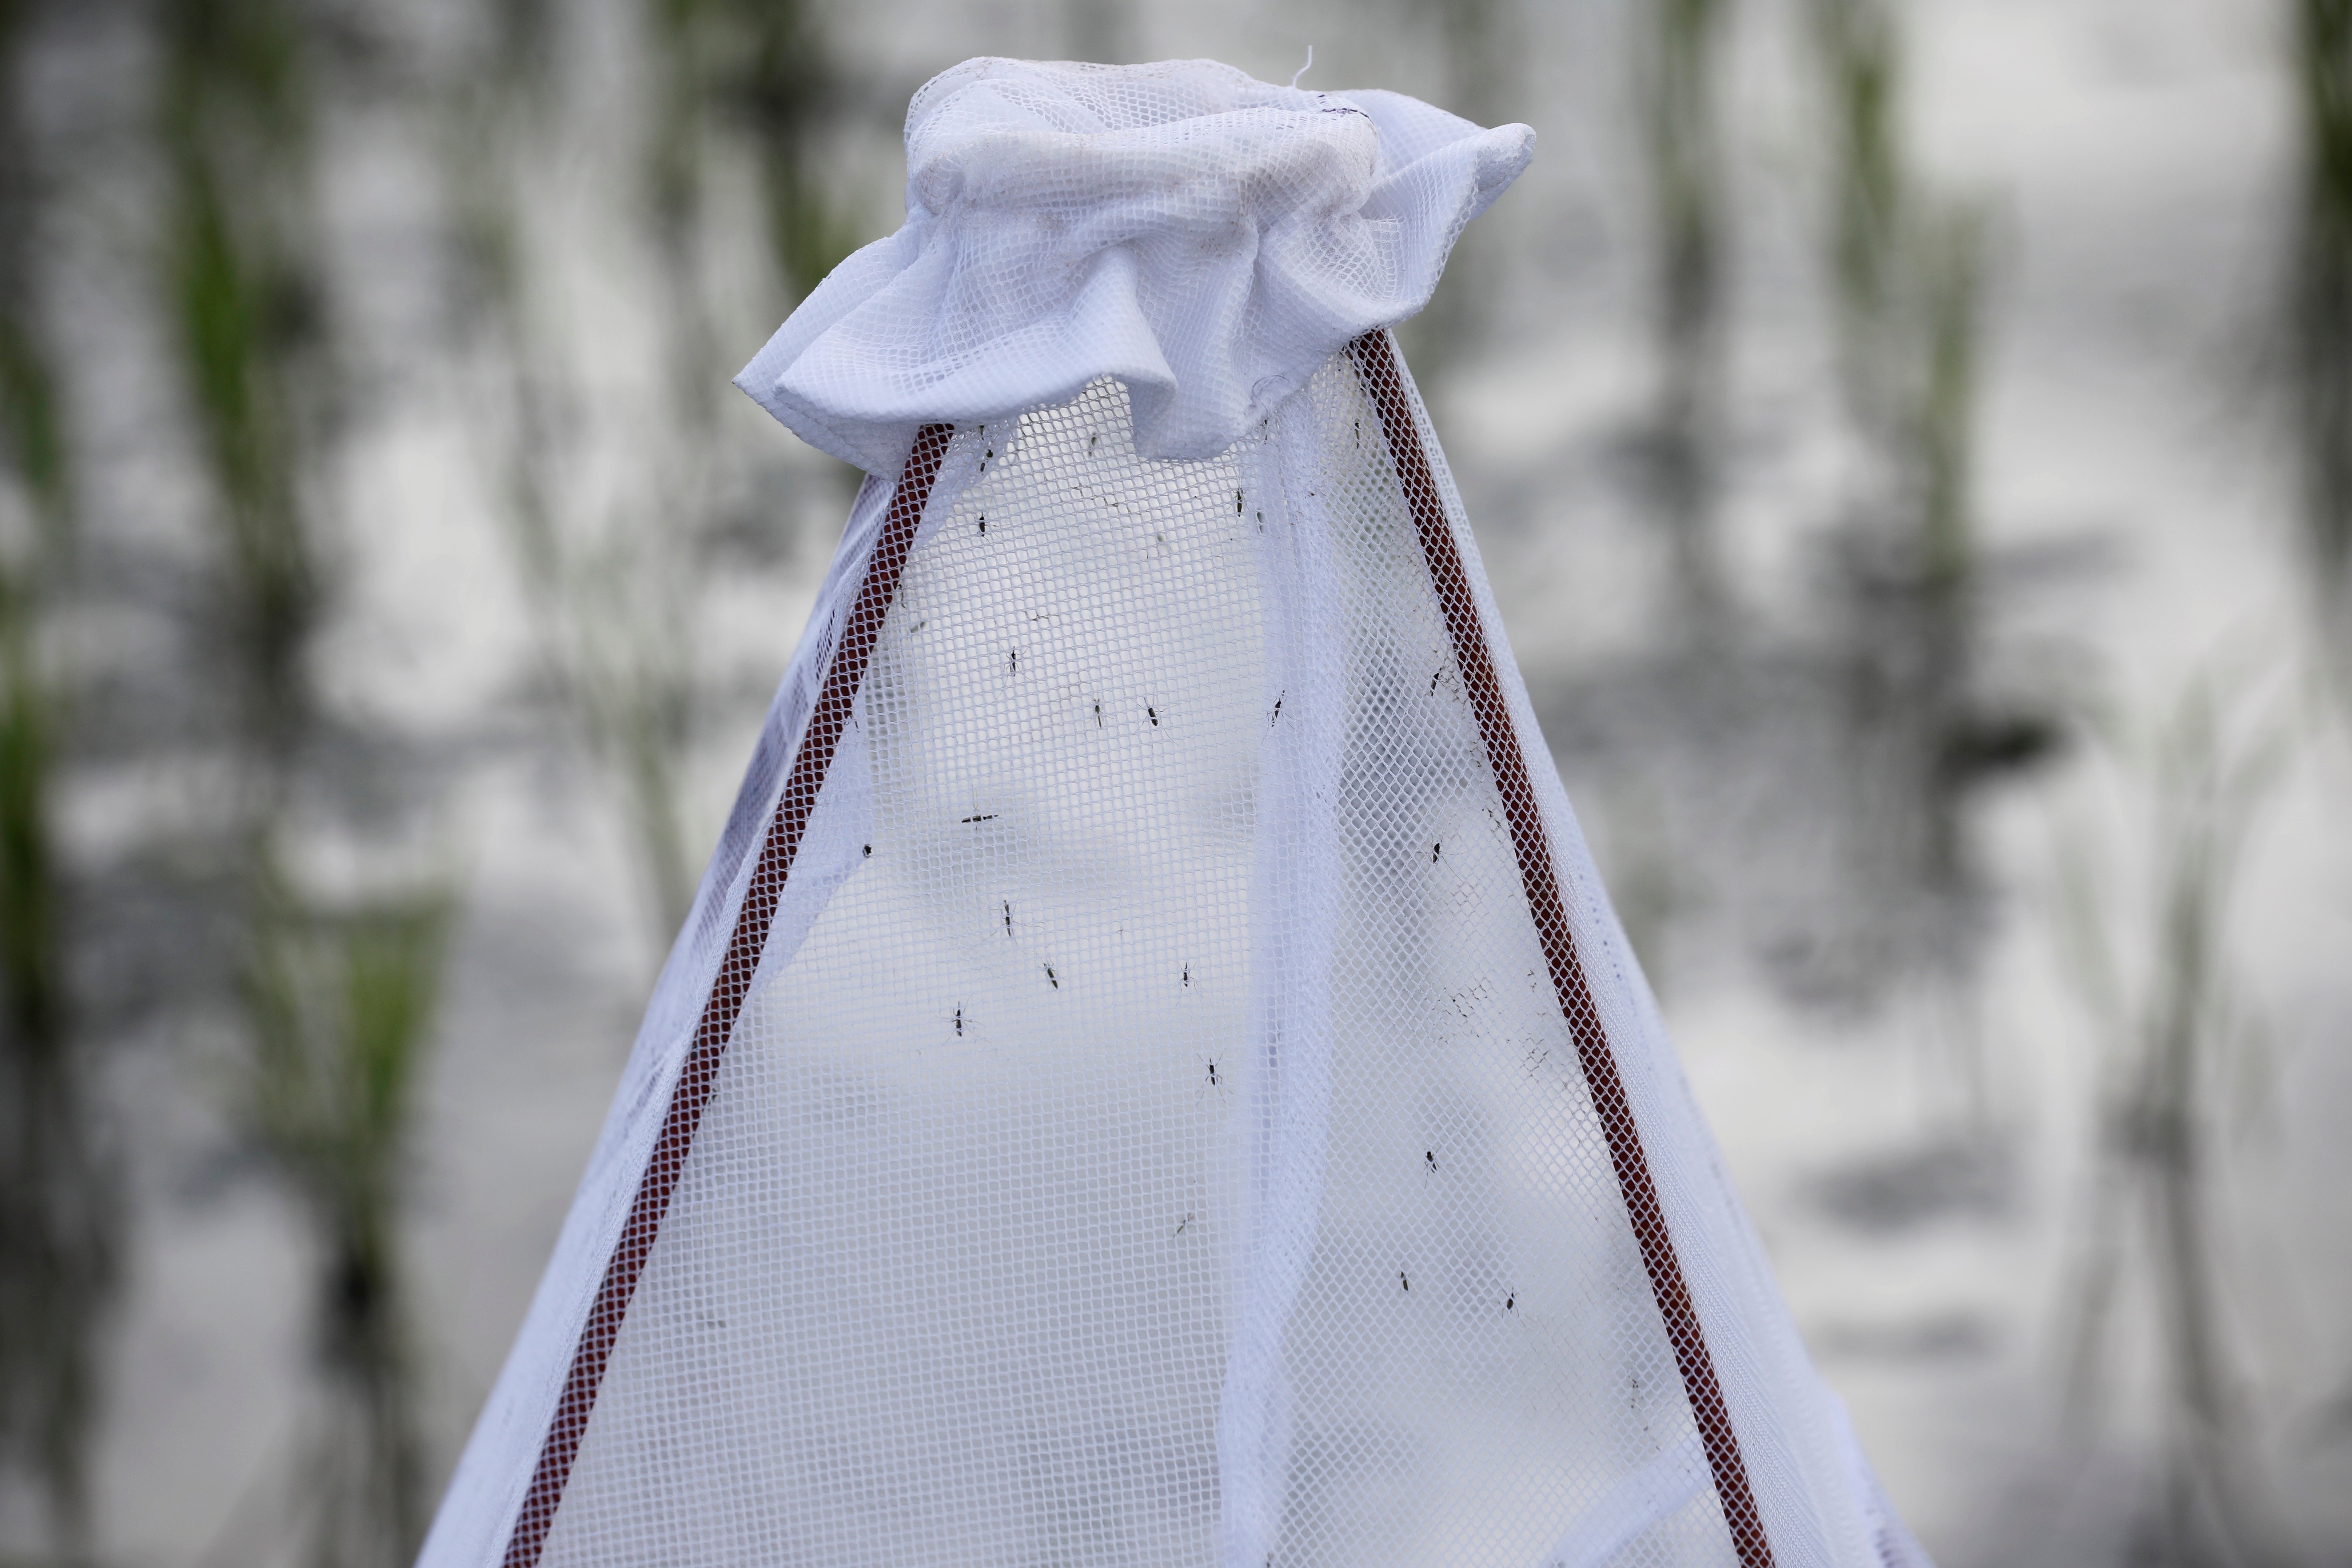 Anopheles mosquitoes are seen in a net placed in a rice field during a test in the use of drone technology in the fight against malaria near Zanzibar City, on the island of Zanzibar